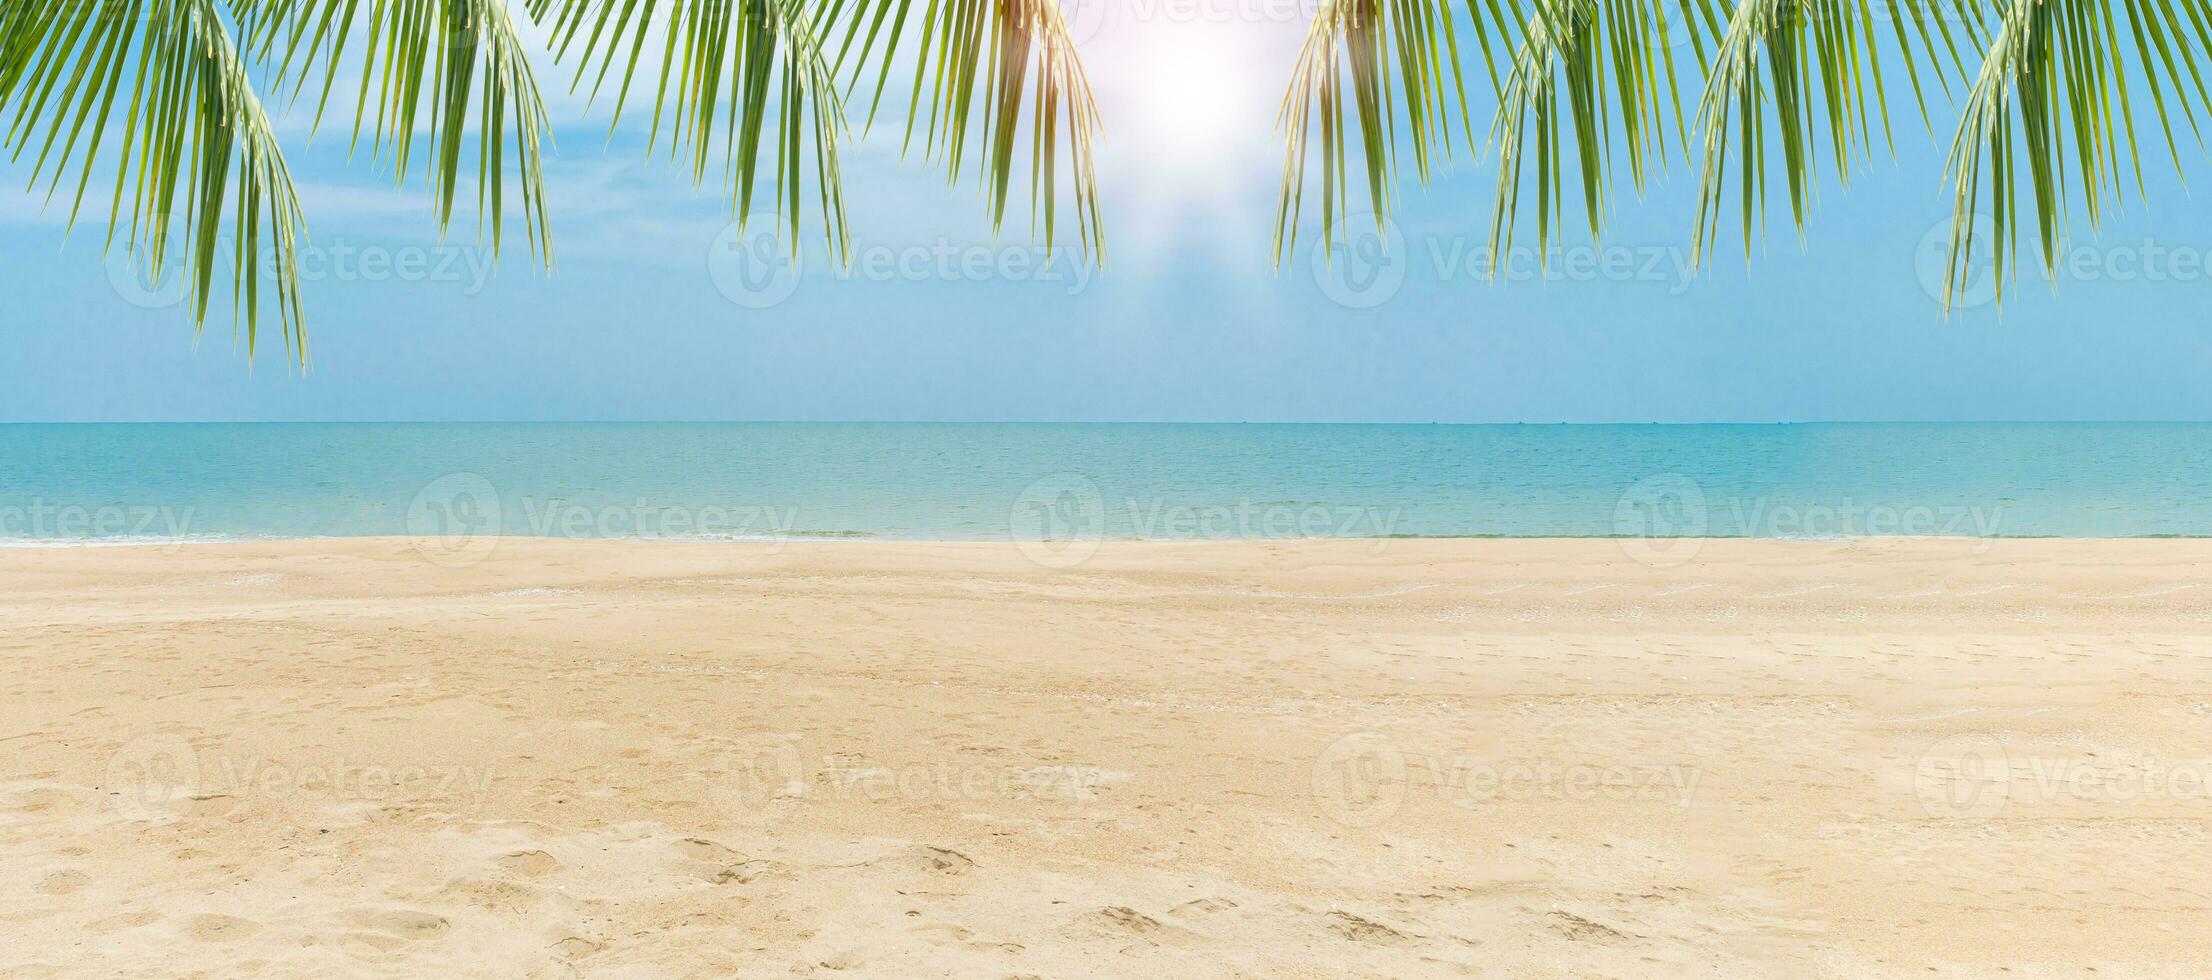 Green leaves of Palm coconut trees against blue sky and beautiful beach on day. View with of nice tropical beach. Vacation holidays background. Wallpaper. Copy space bottom side for design or content photo